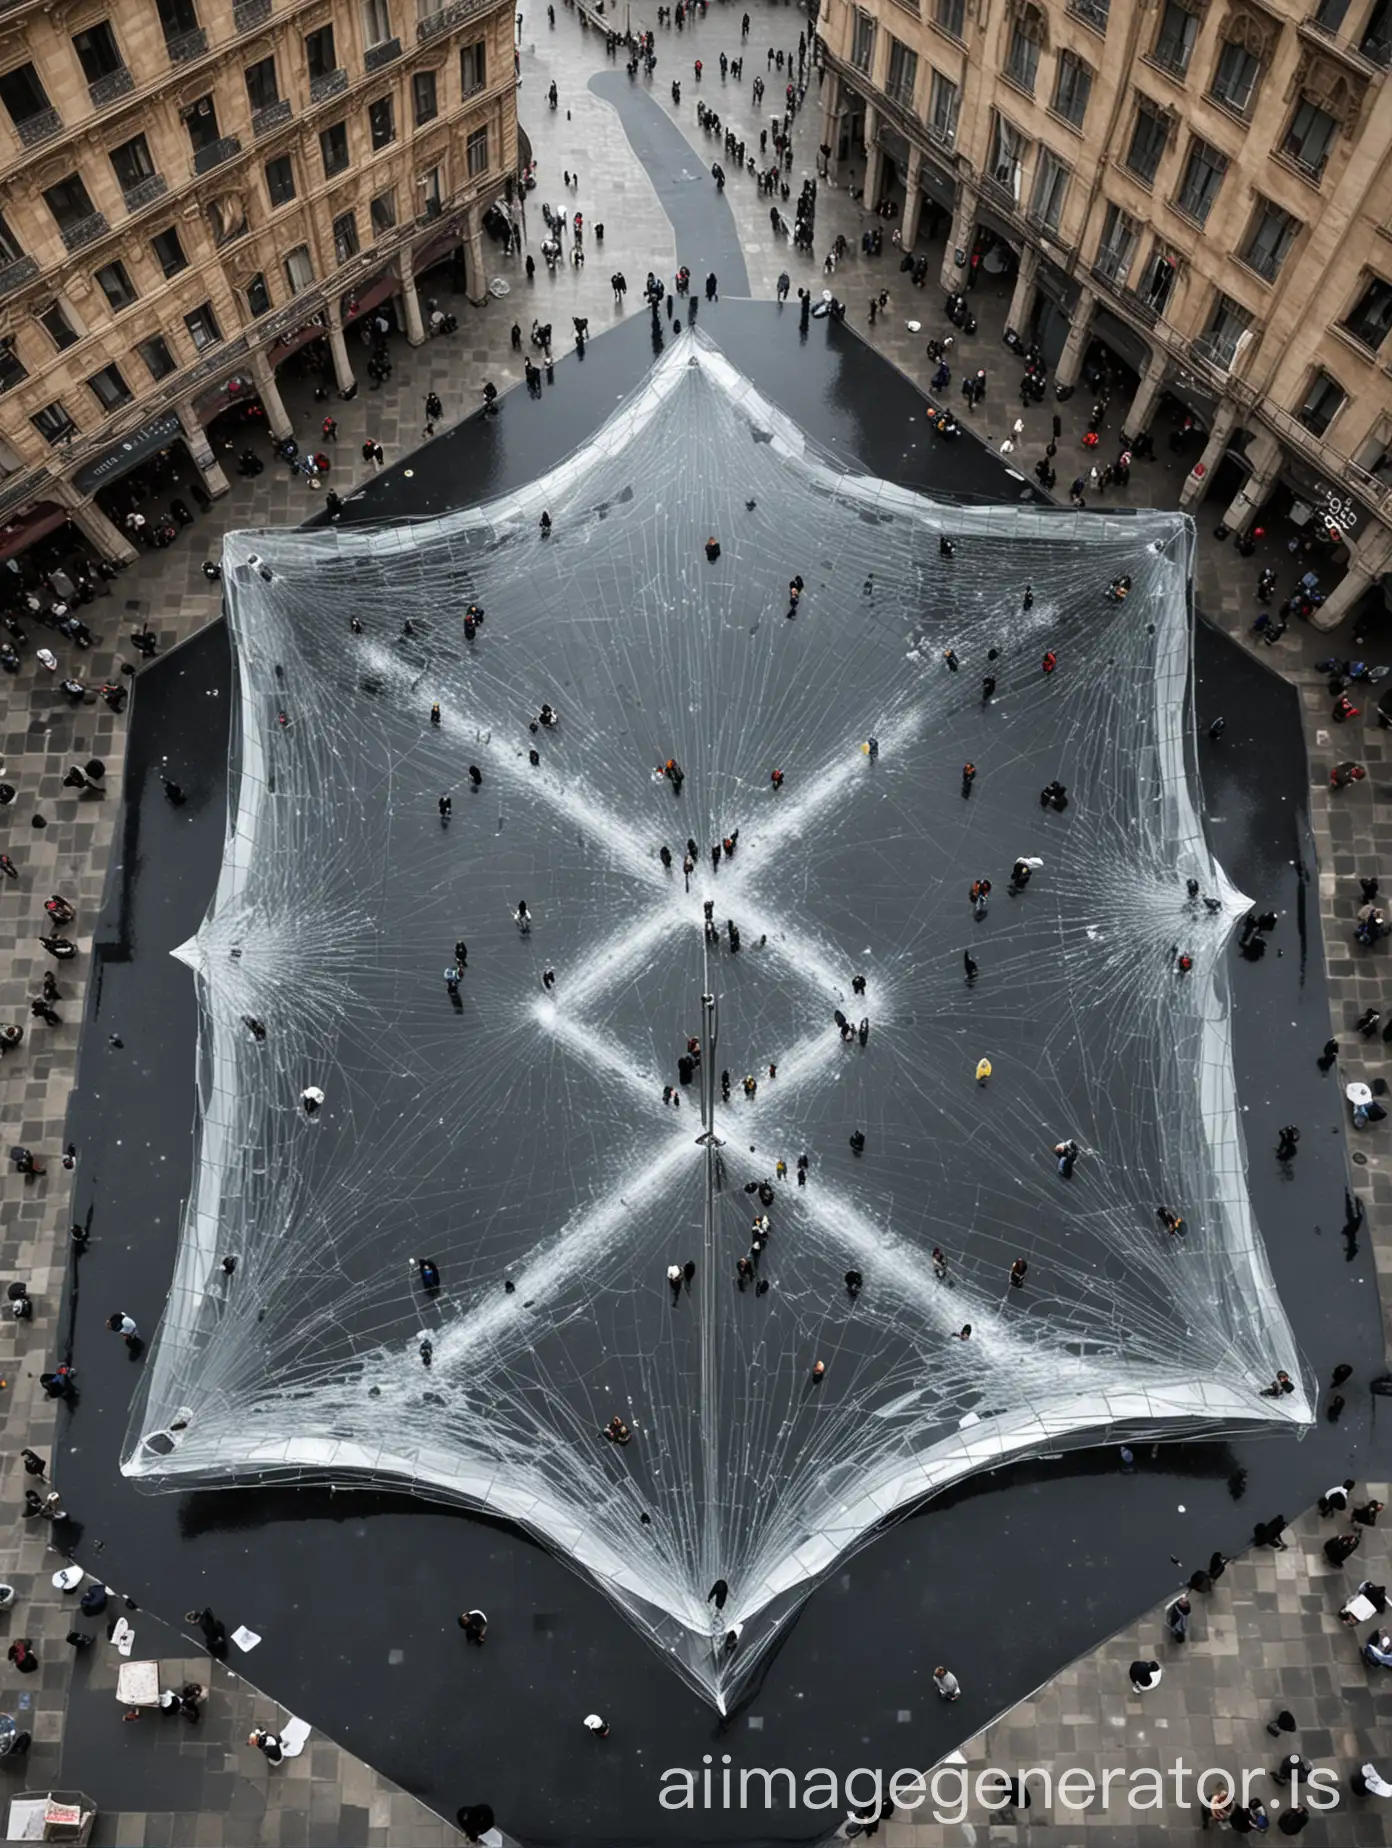 water collecting parametric- structure in the middle of an open square in an urban city people waiting under the structure,